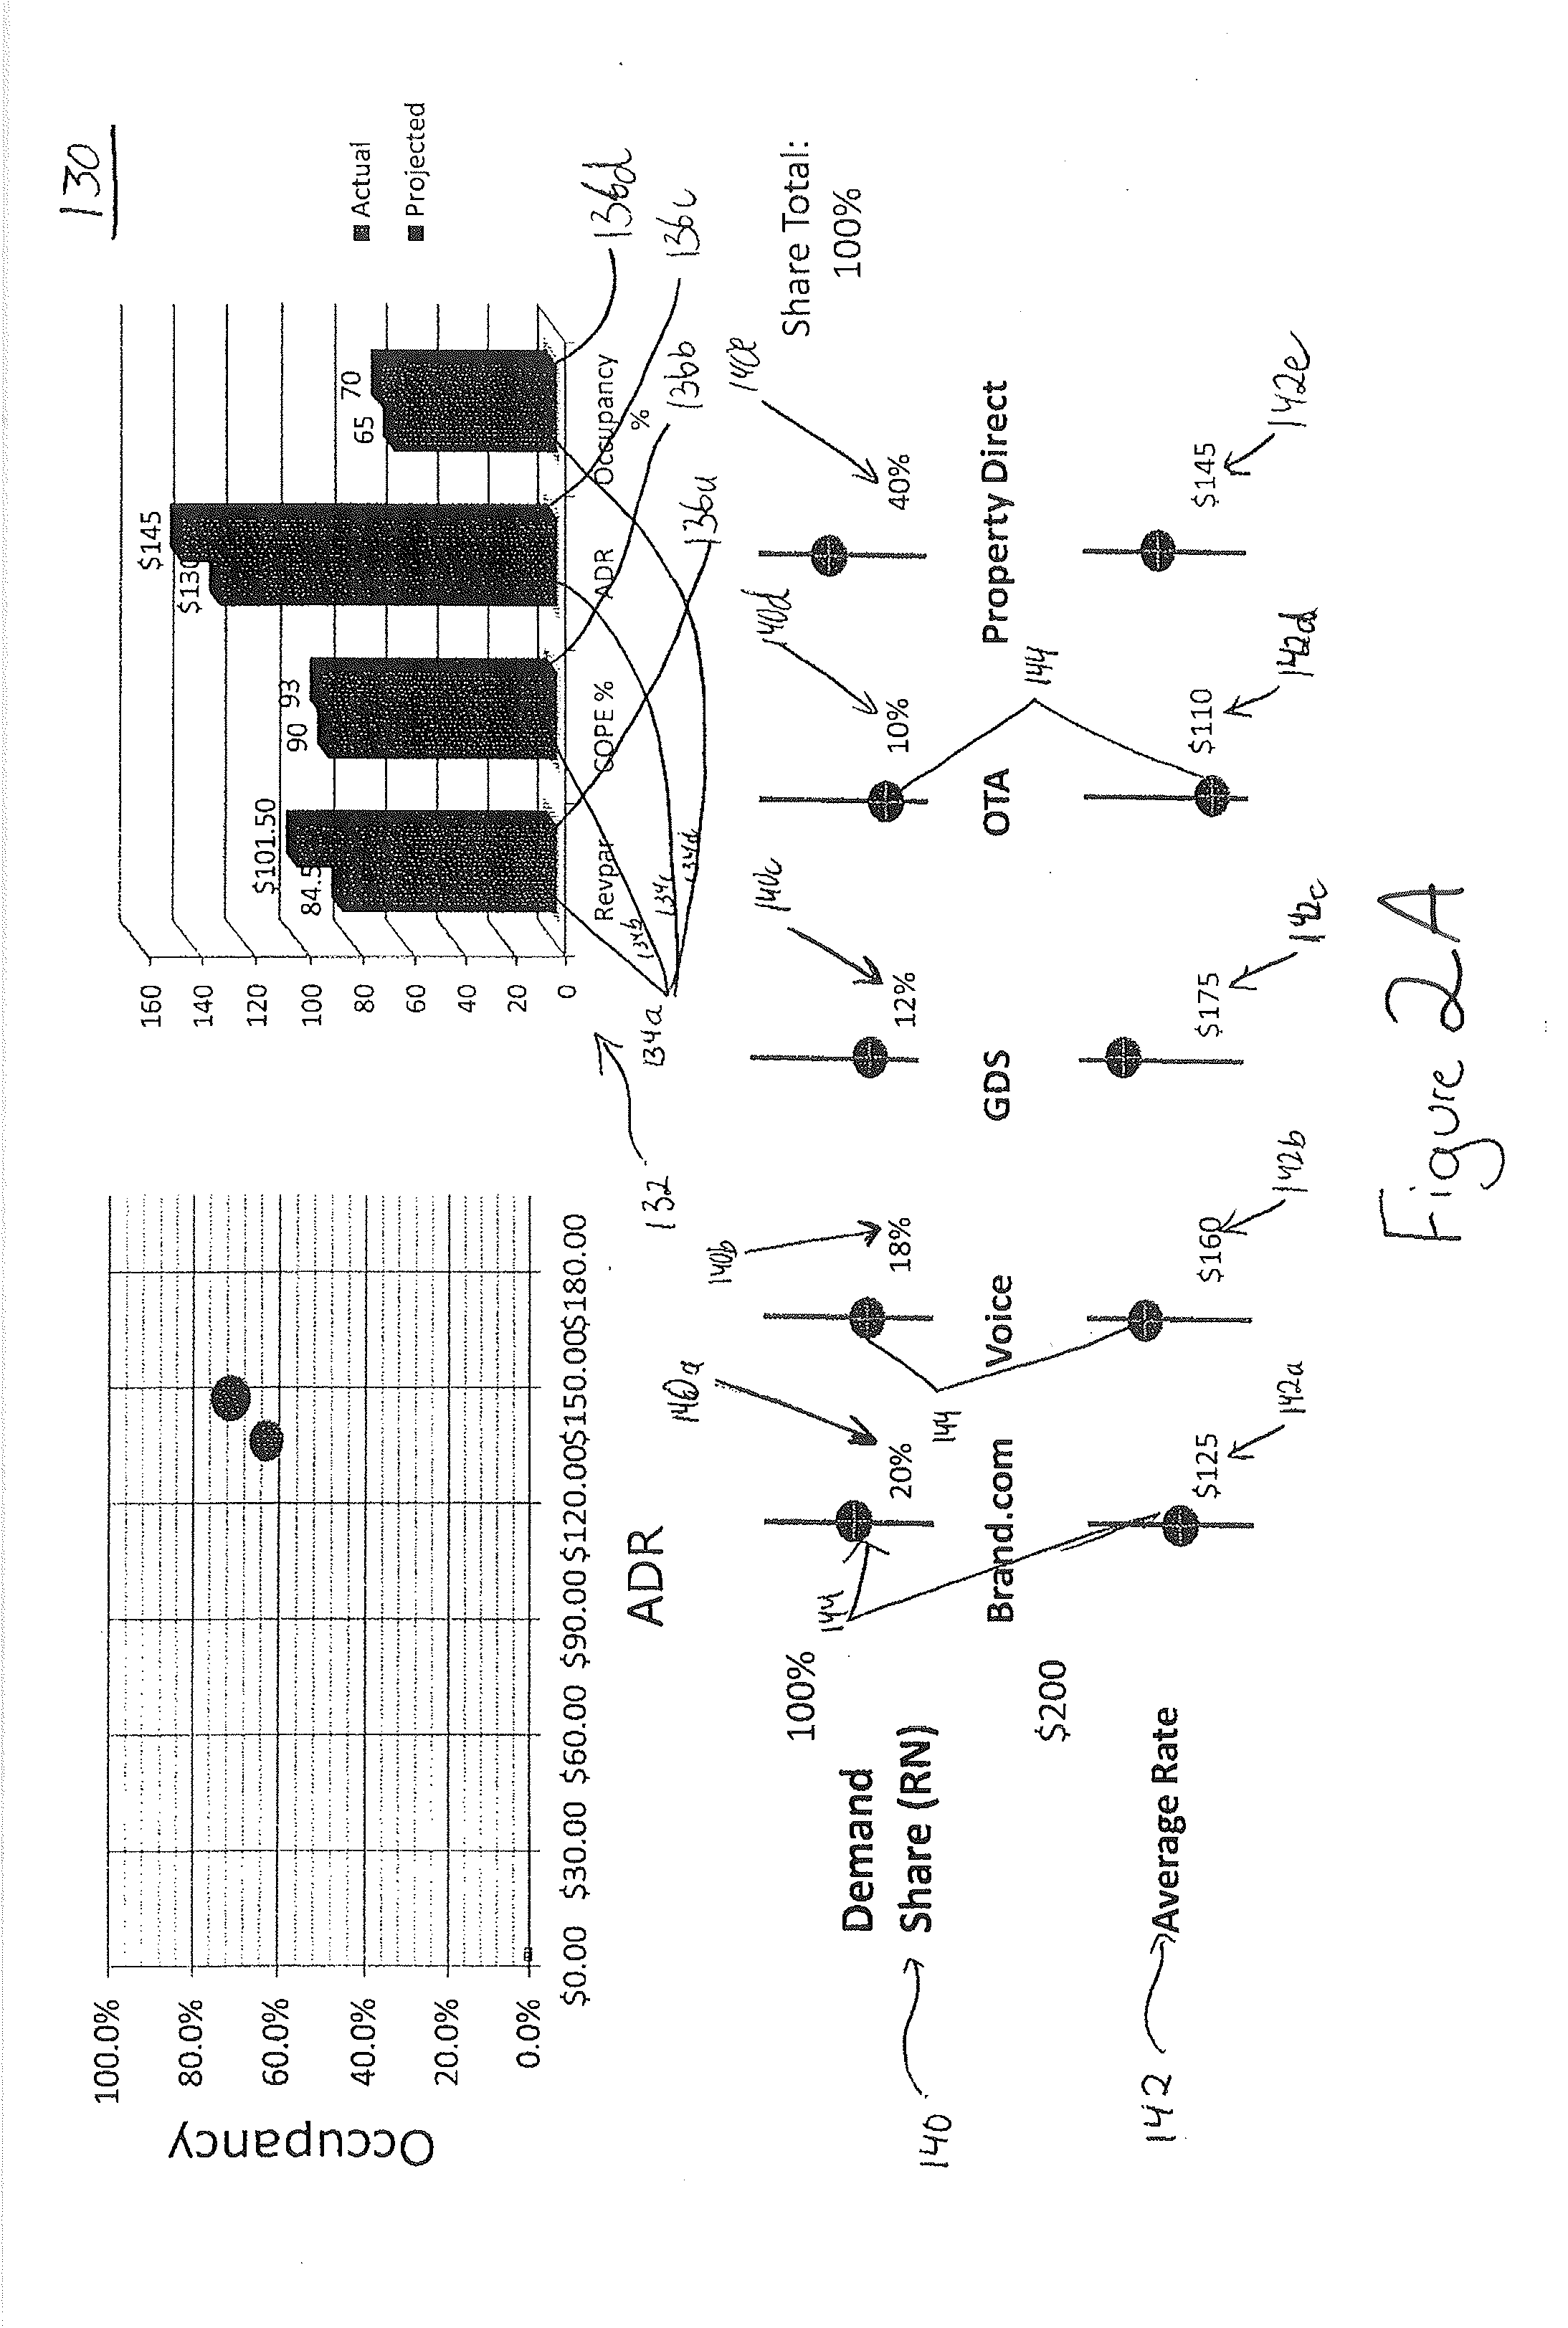 System and method for analyzing hospitality industry data and providing analytical performance management tools